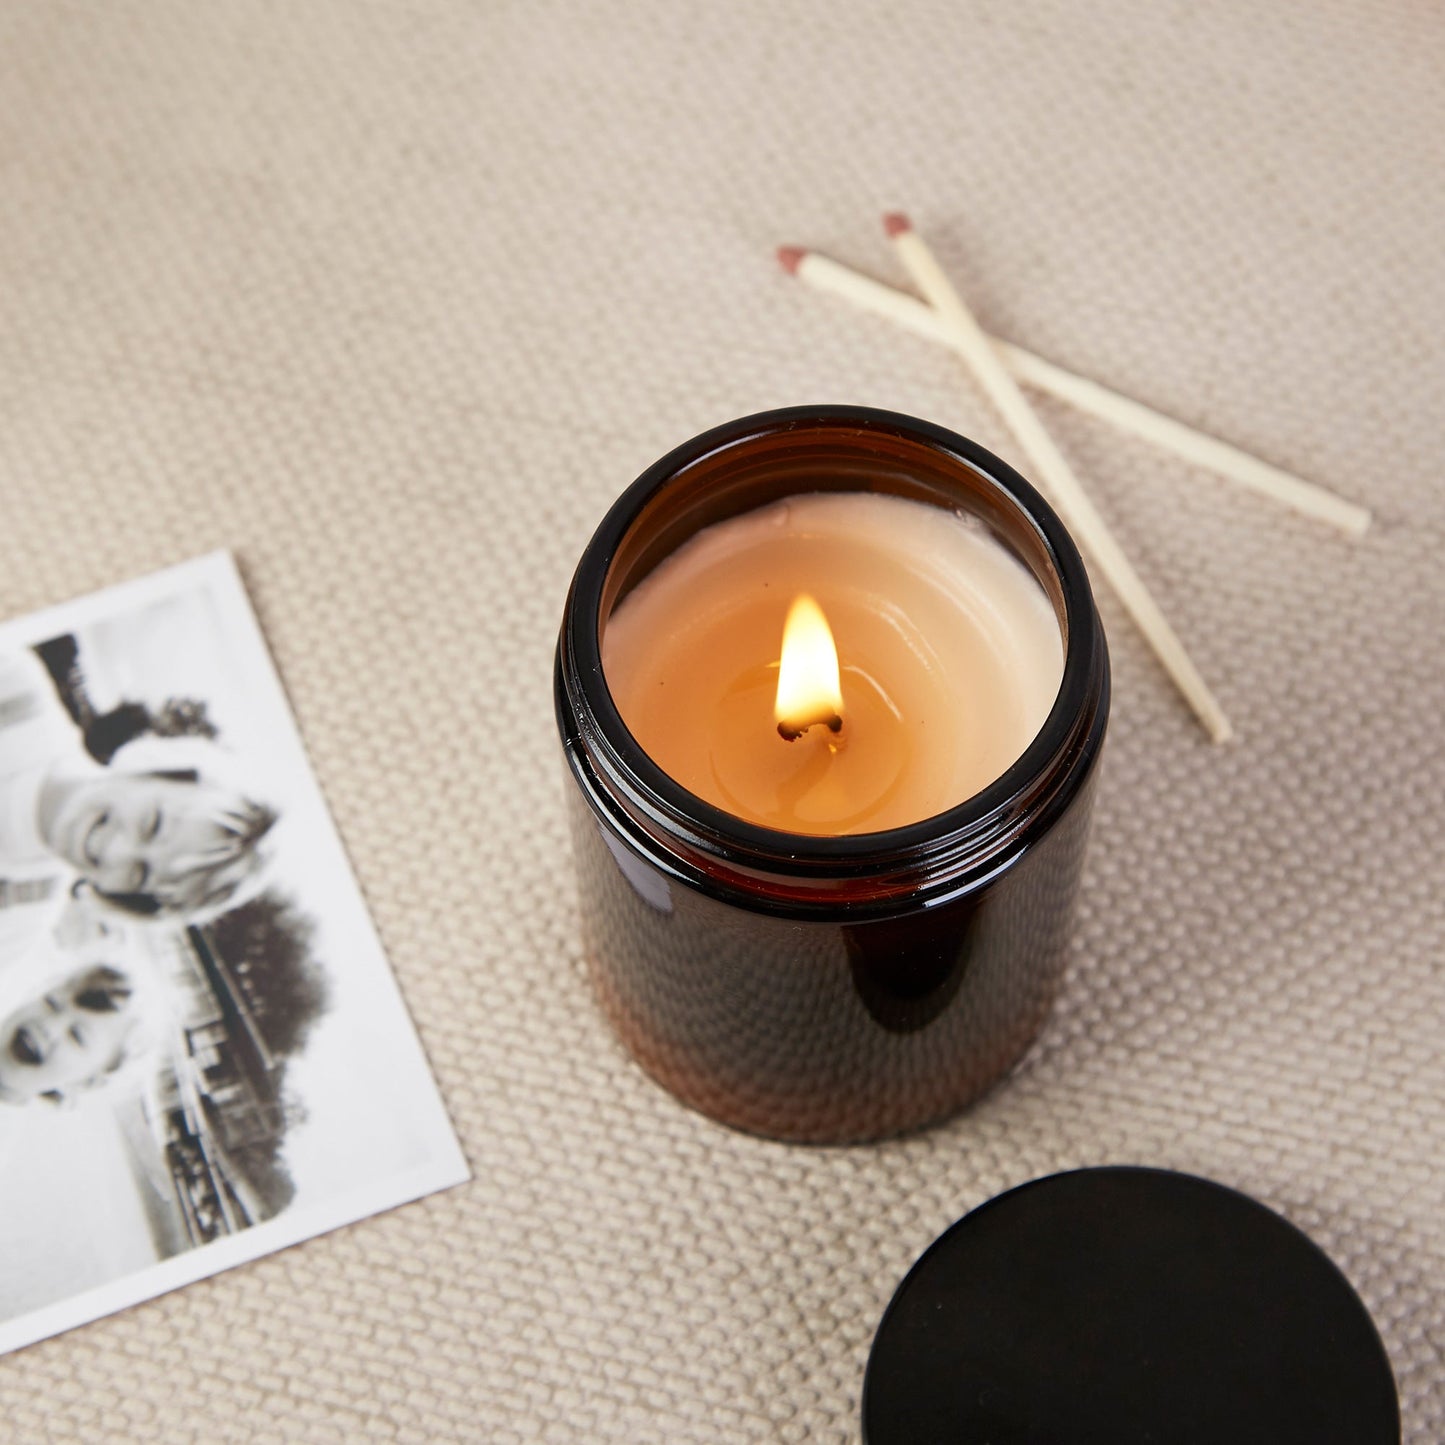 Mother's Day Gift Mum Knows Best Candle - Kindred Fires